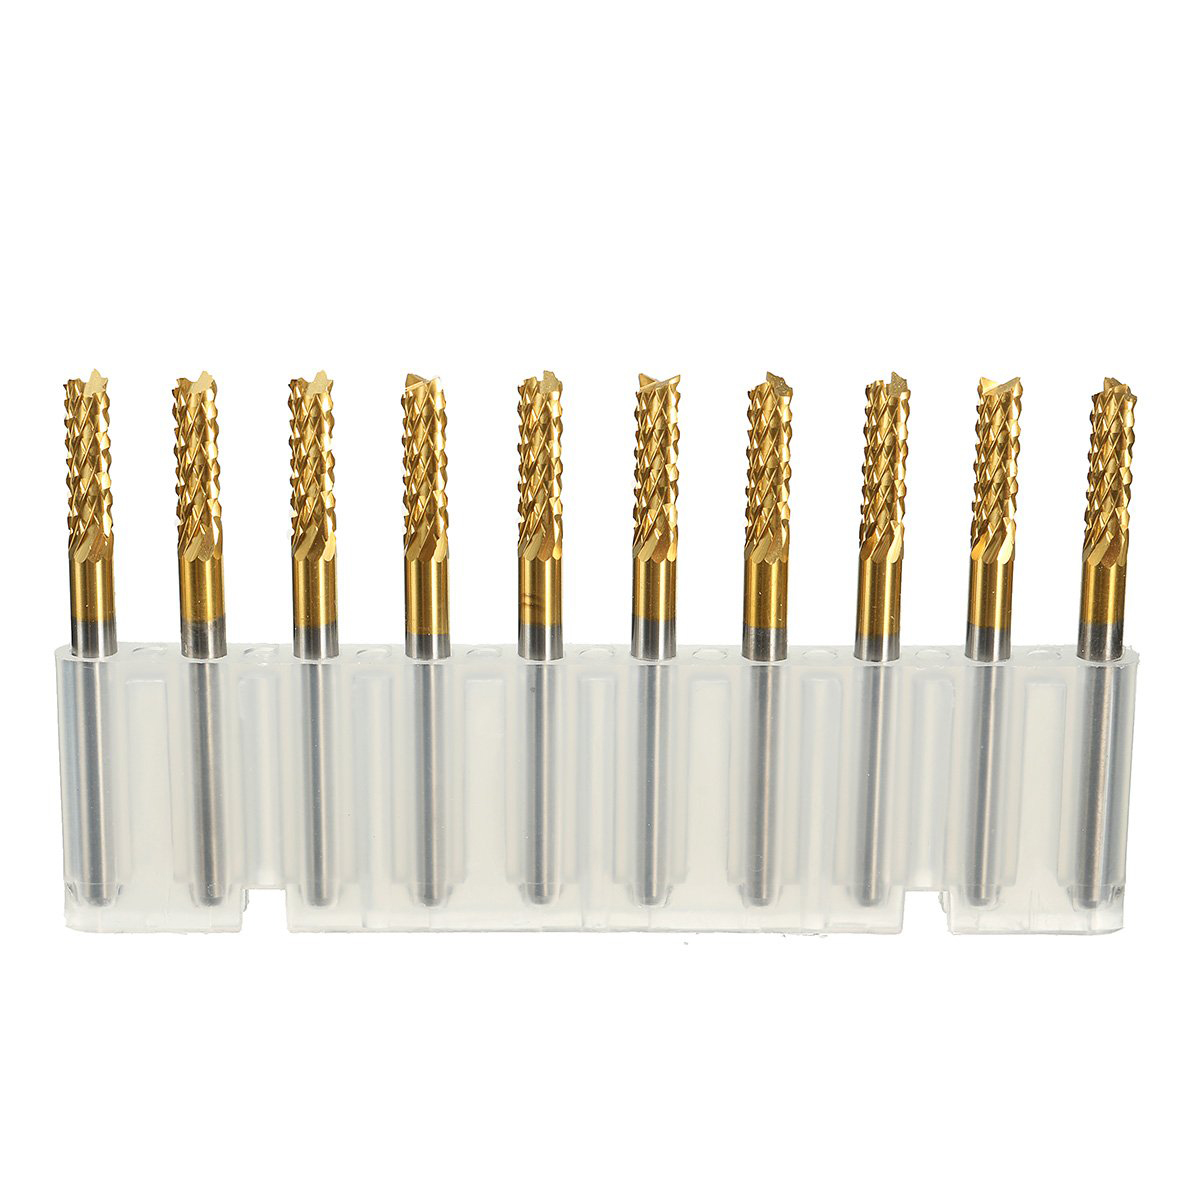 

Drillpro 10pcs 3mm Carbide End Mill Cutter Titanium Coated Engraving Milling Cutter Carbide Rotary Burr